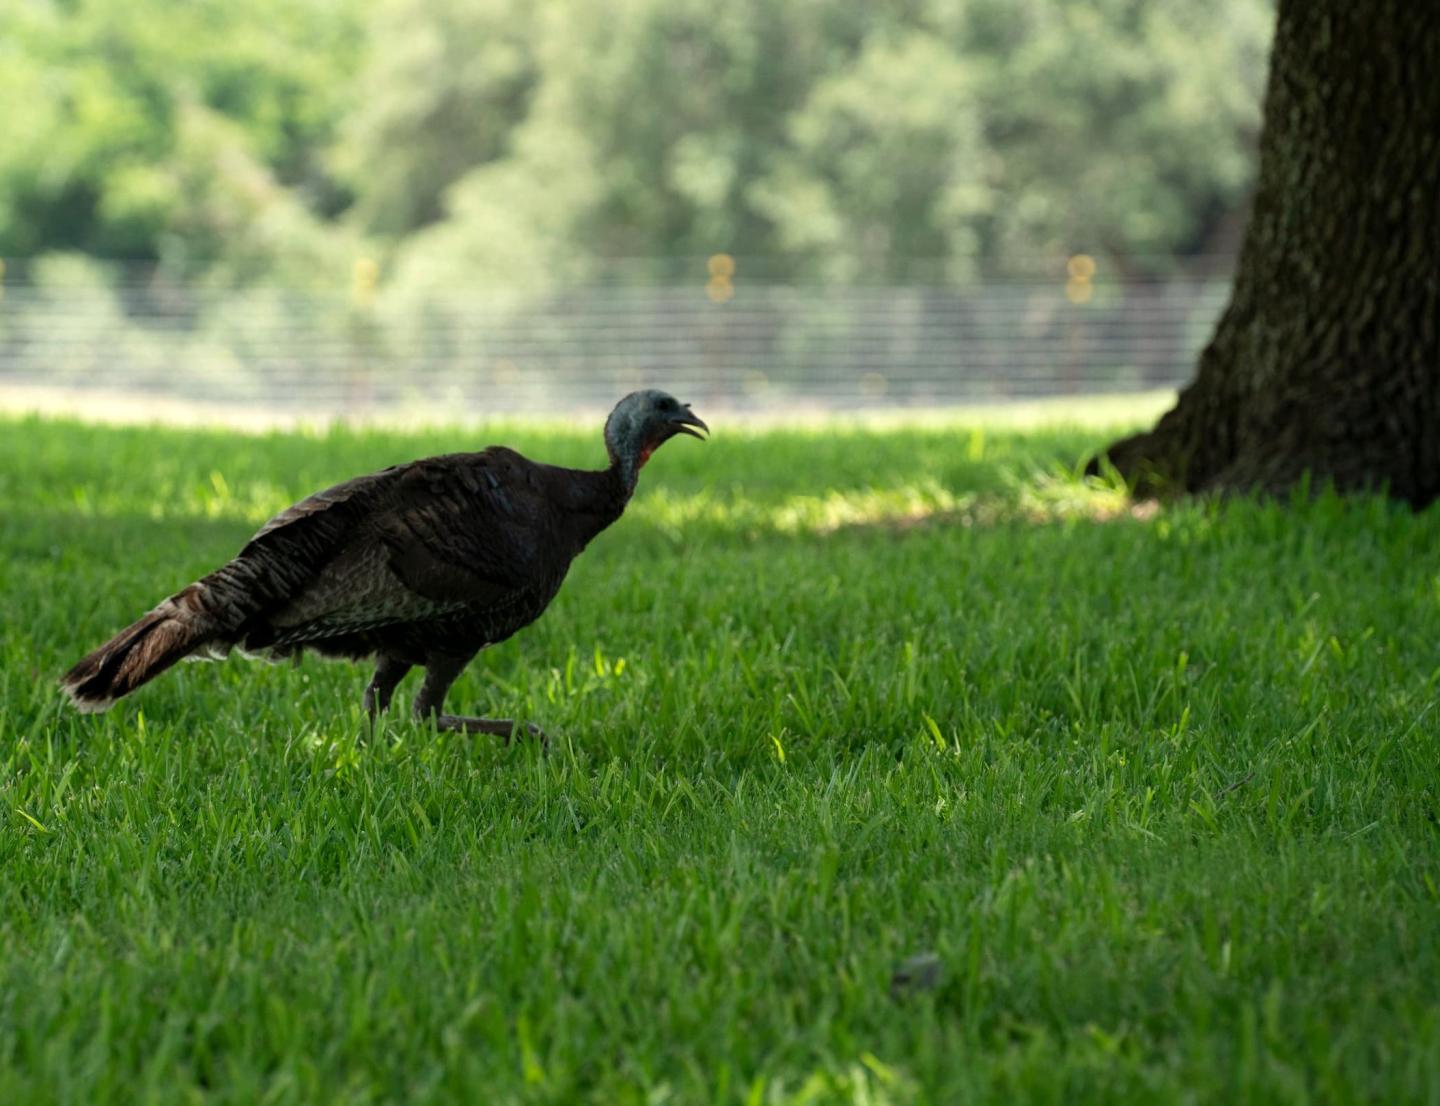 A wild turkey roaming Dice Grove Farms in Bell County Texas after conservation work was completed.